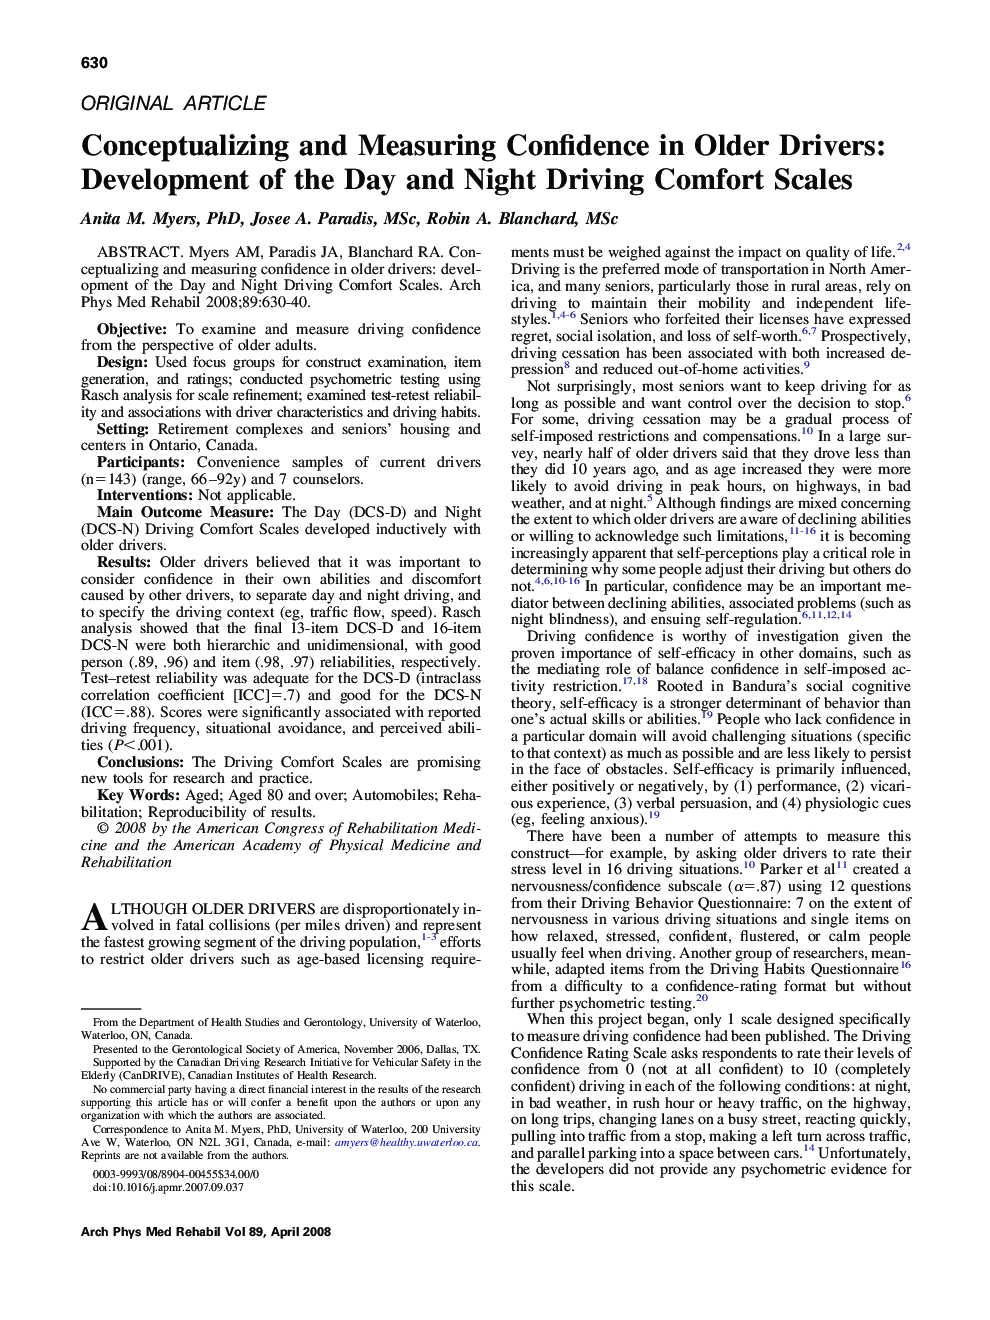 Conceptualizing and Measuring Confidence in Older Drivers: Development of the Day and Night Driving Comfort Scales 